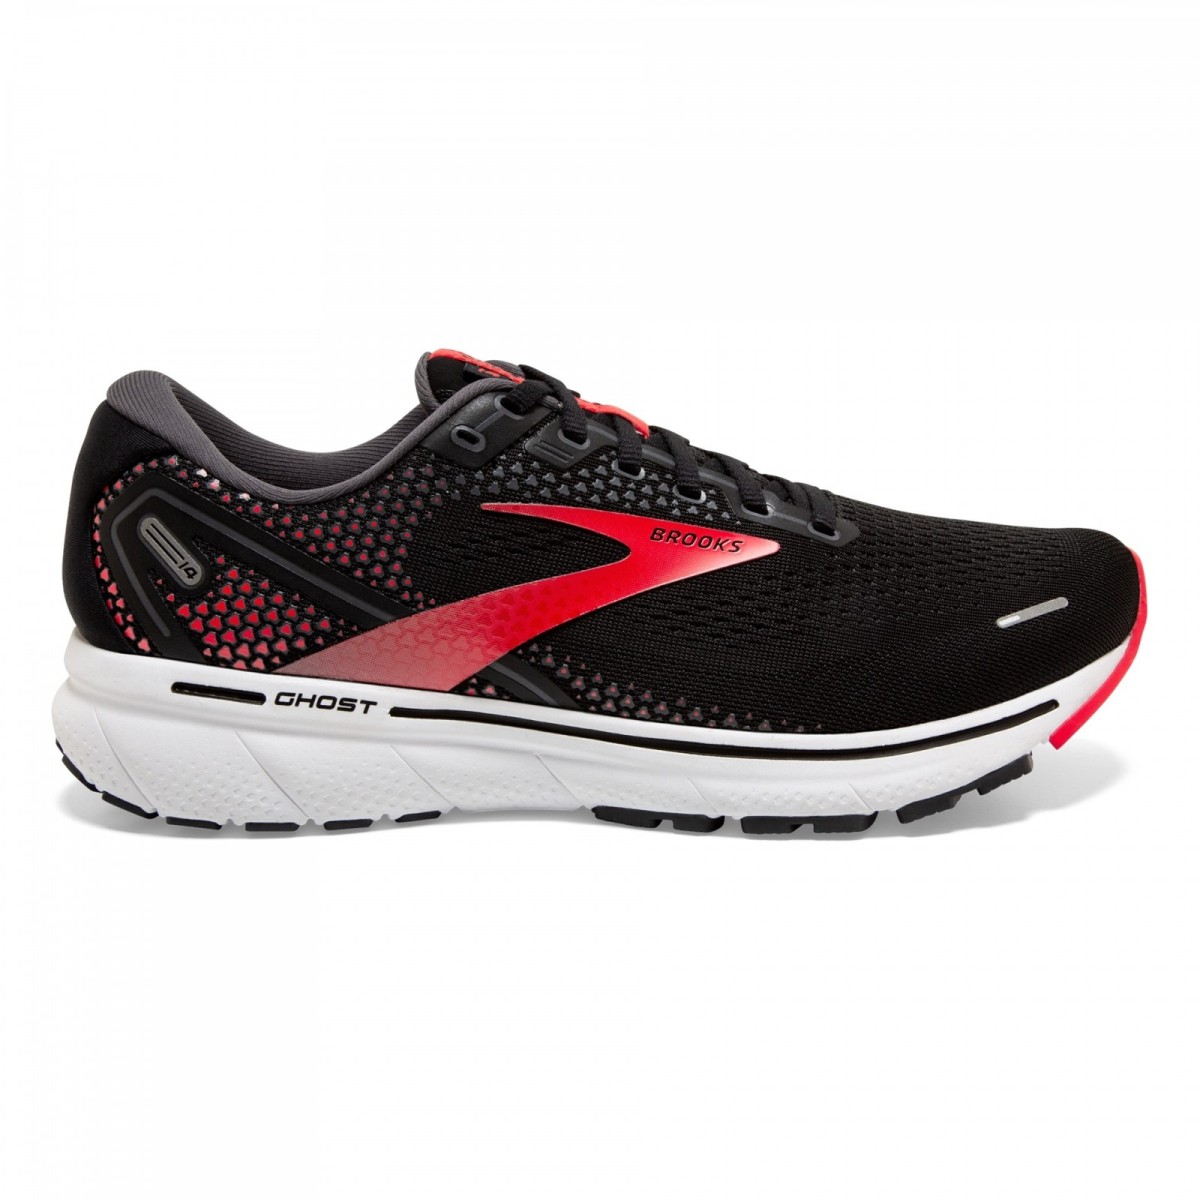 Brooks Ghost 14 Black / Red / White Updated midsole is now 100% DNA ...